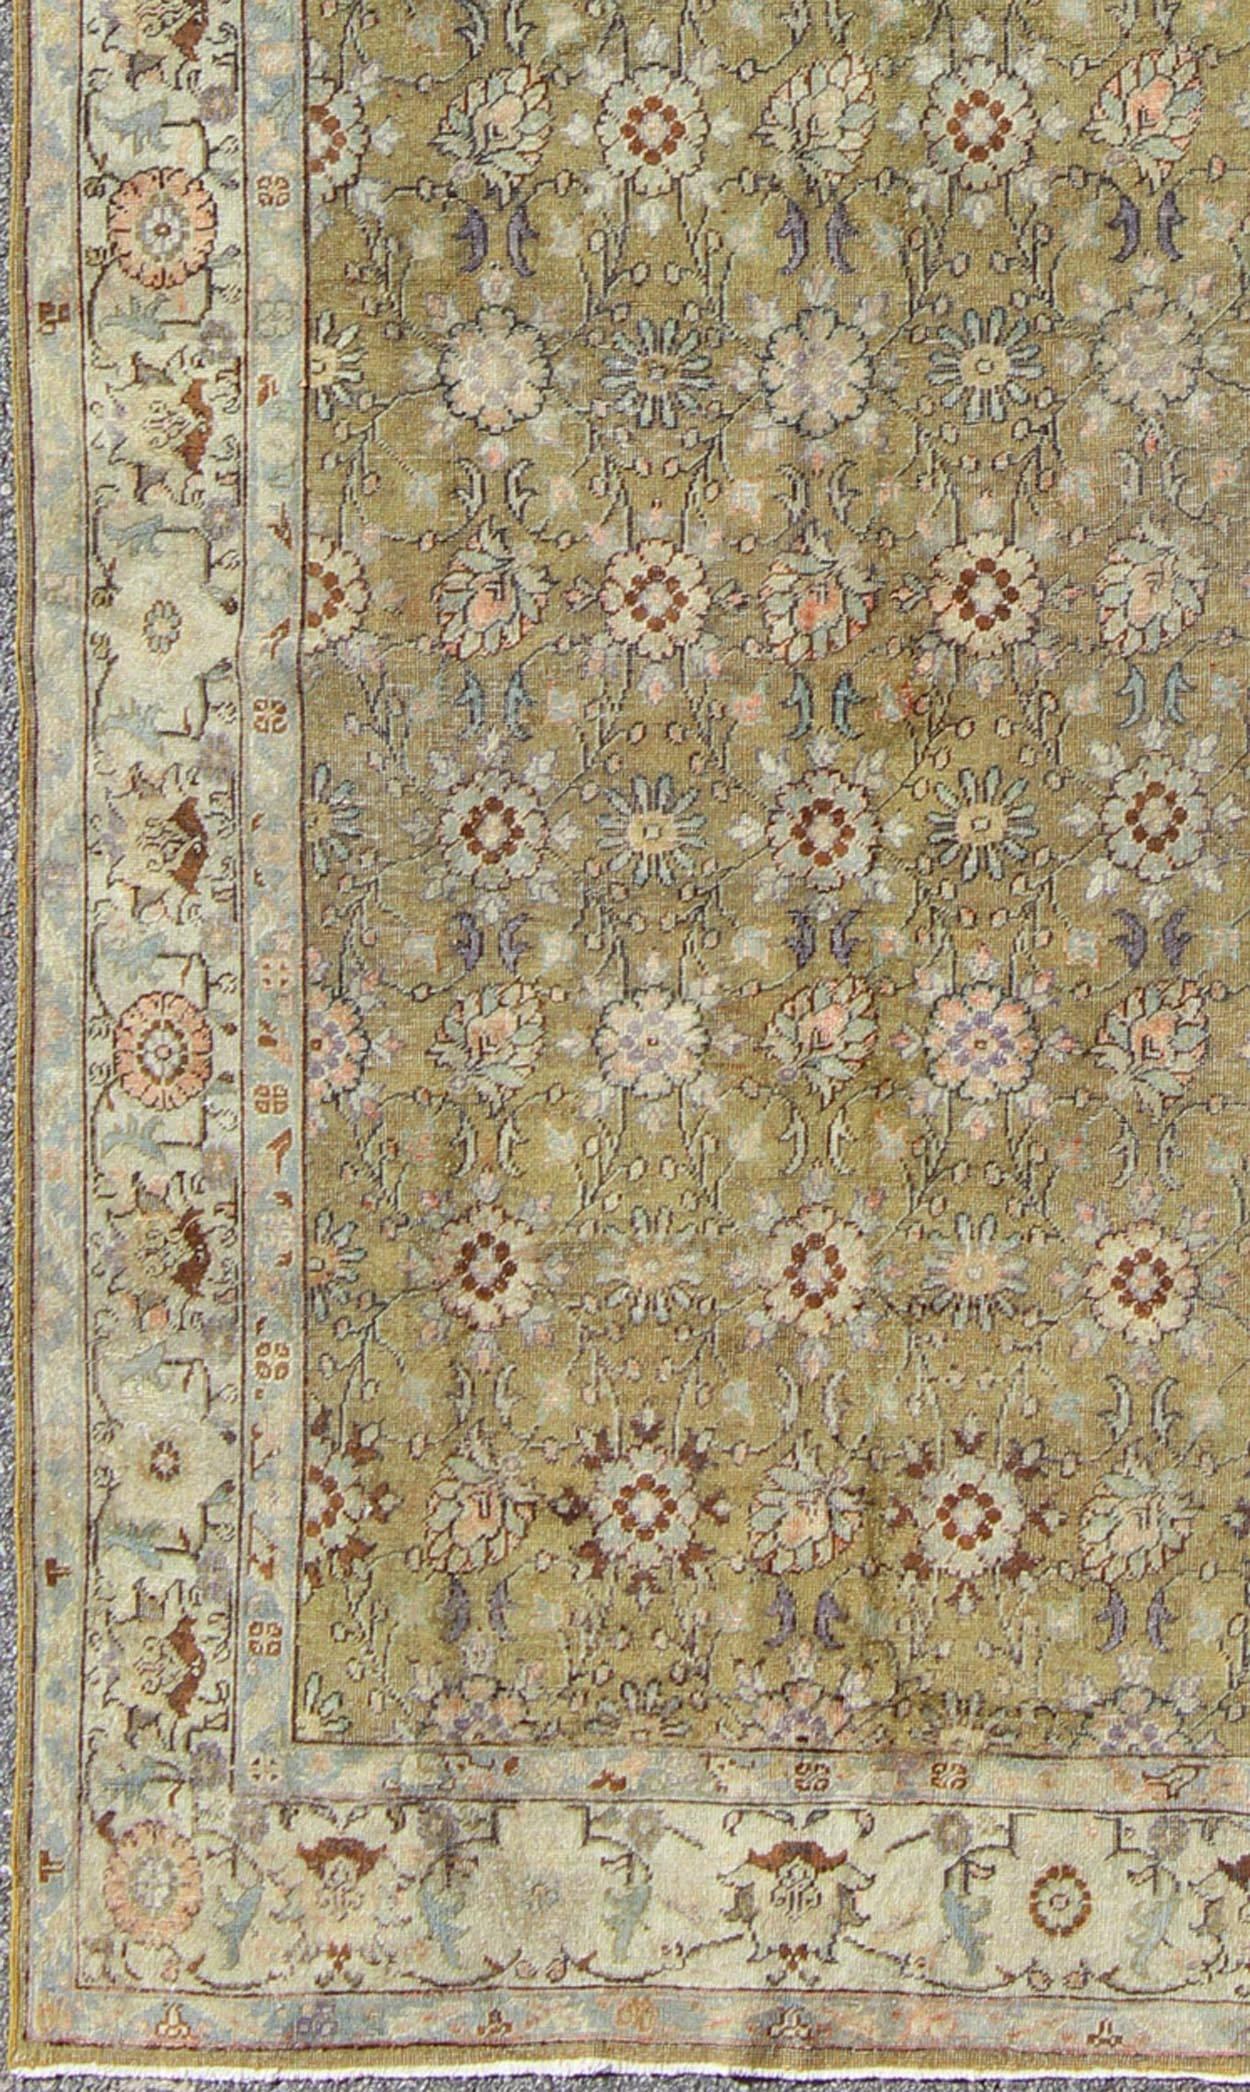 This broad antique Turkish oushak runner is remarkably elegant in both color and design. The central field of green plays host to a variety interconnected blossoms in an all-over pattern with intermixed palmette motifs. The simplified inner and